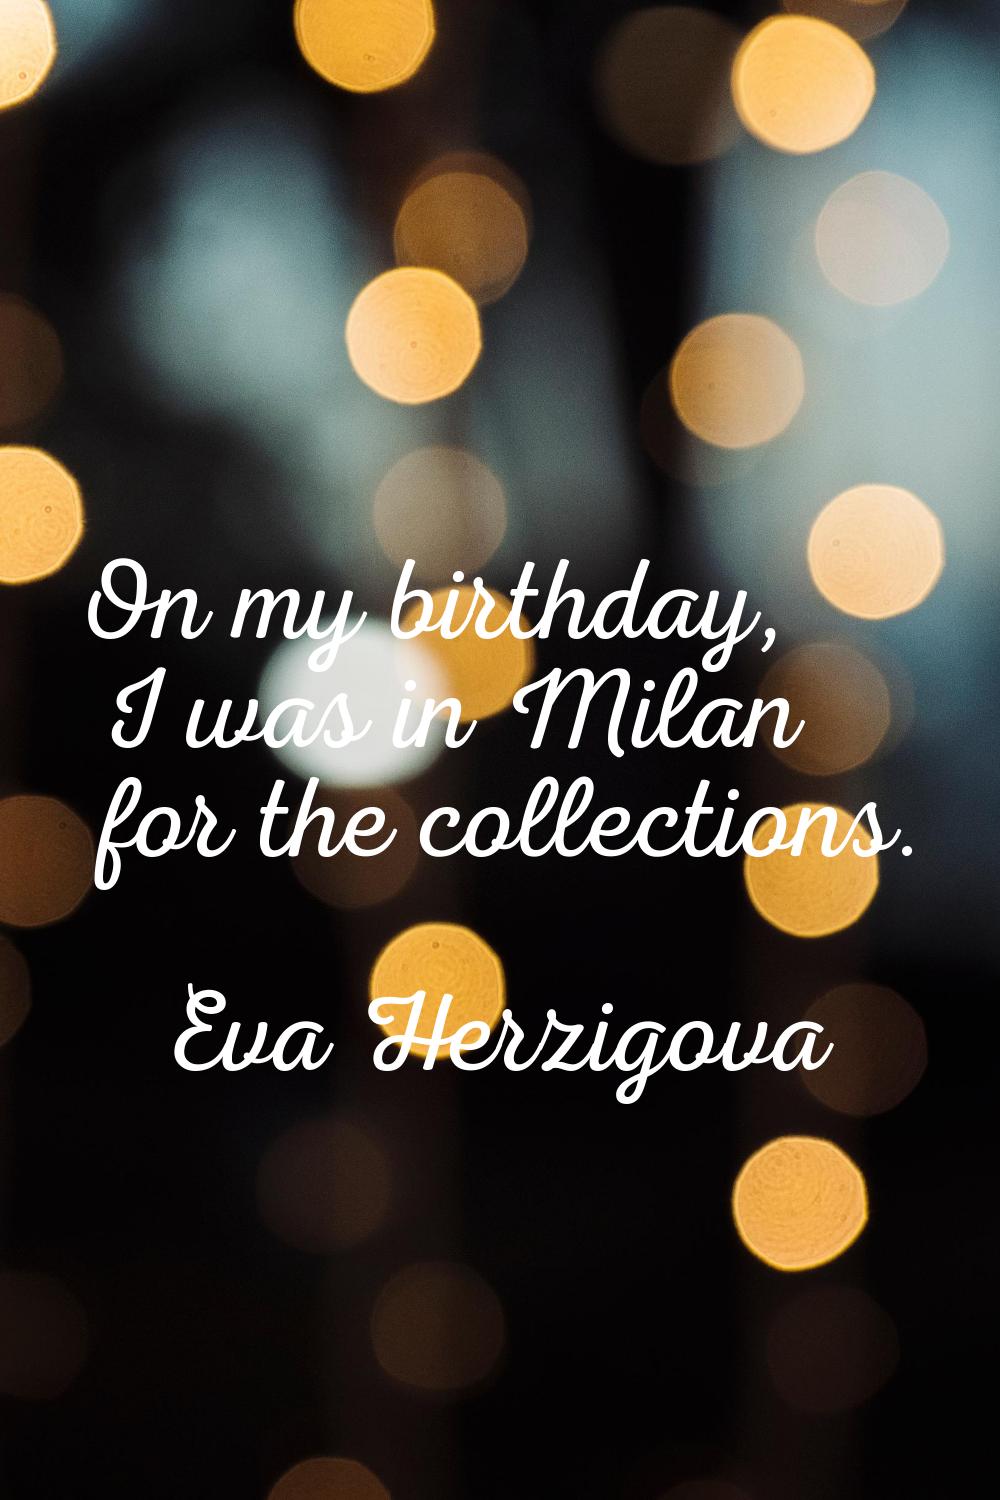 On my birthday, I was in Milan for the collections.